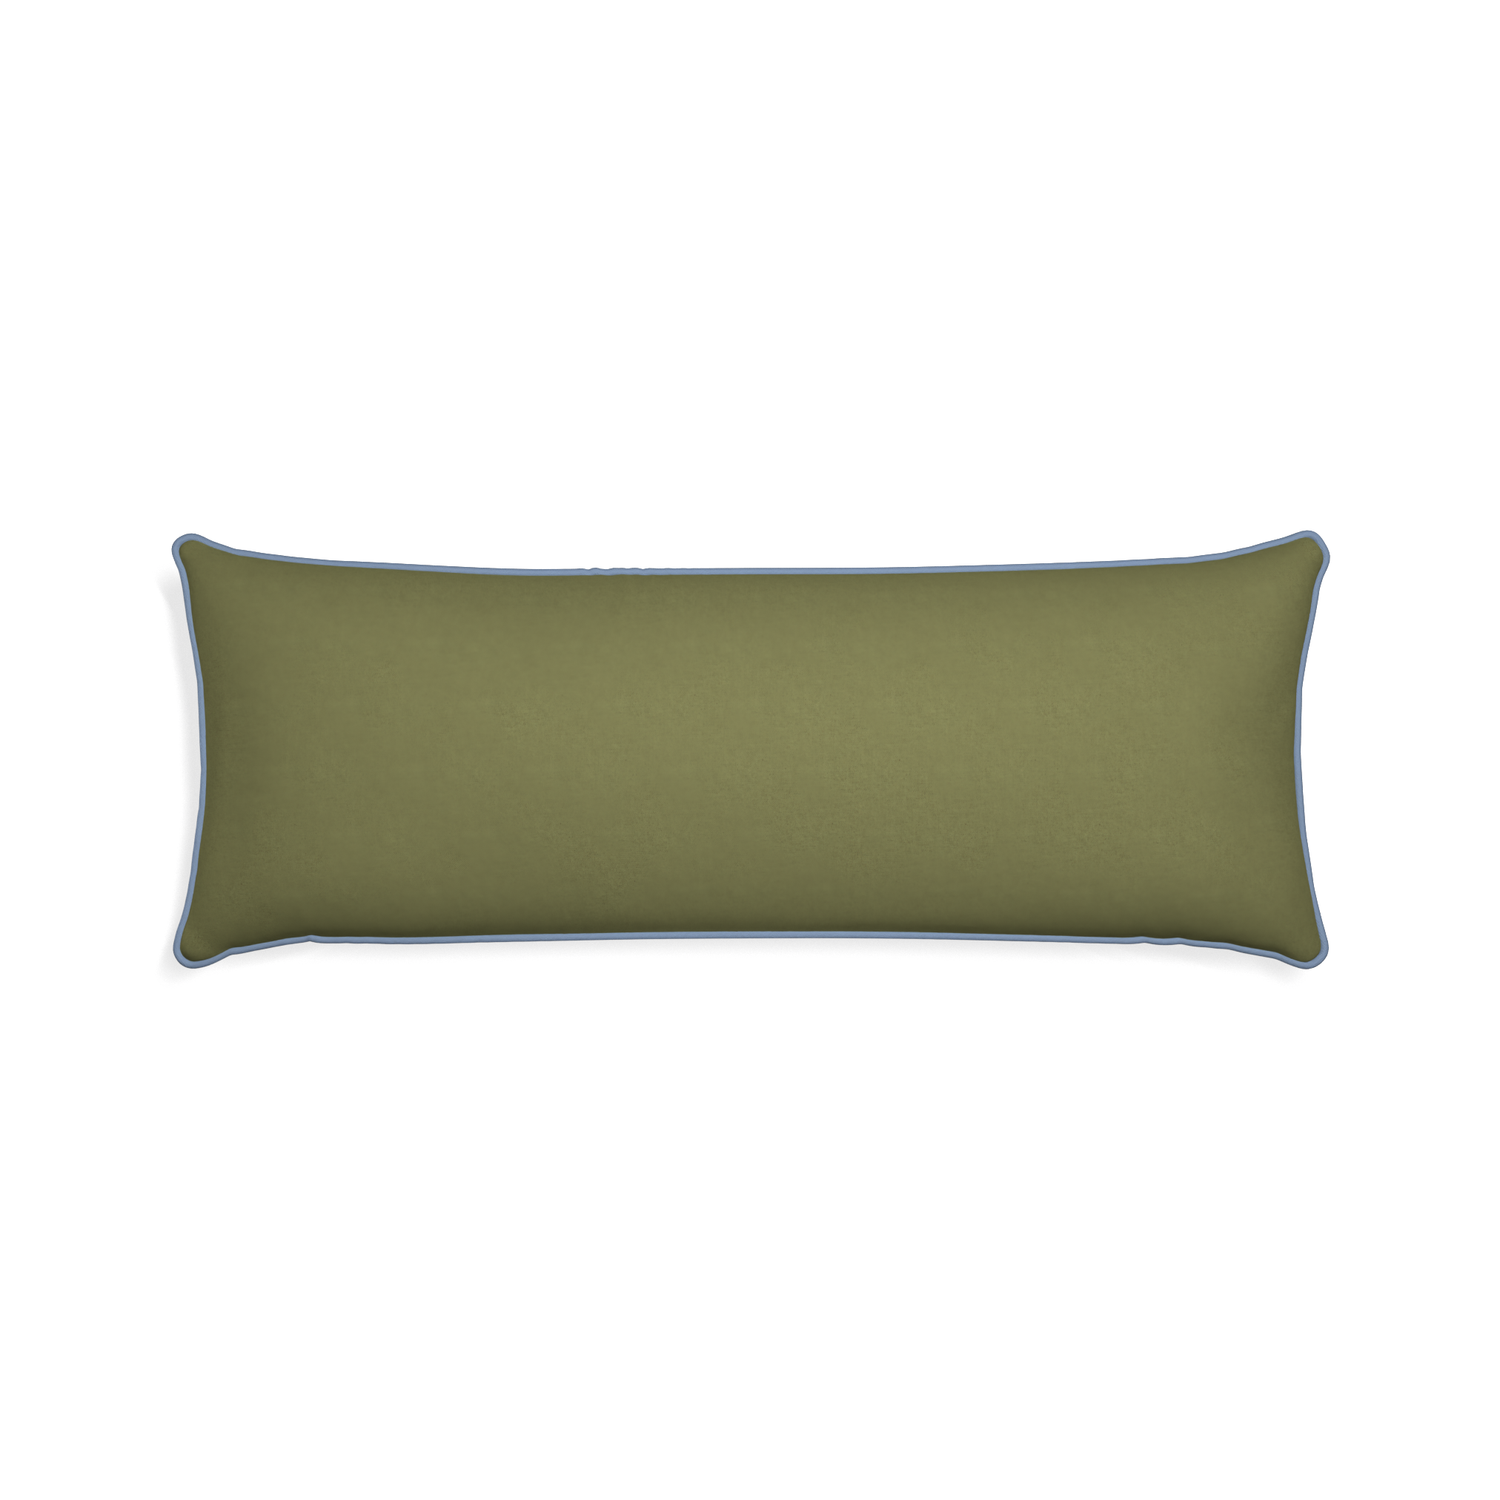 Xl-lumbar moss custom moss greenpillow with sky piping on white background